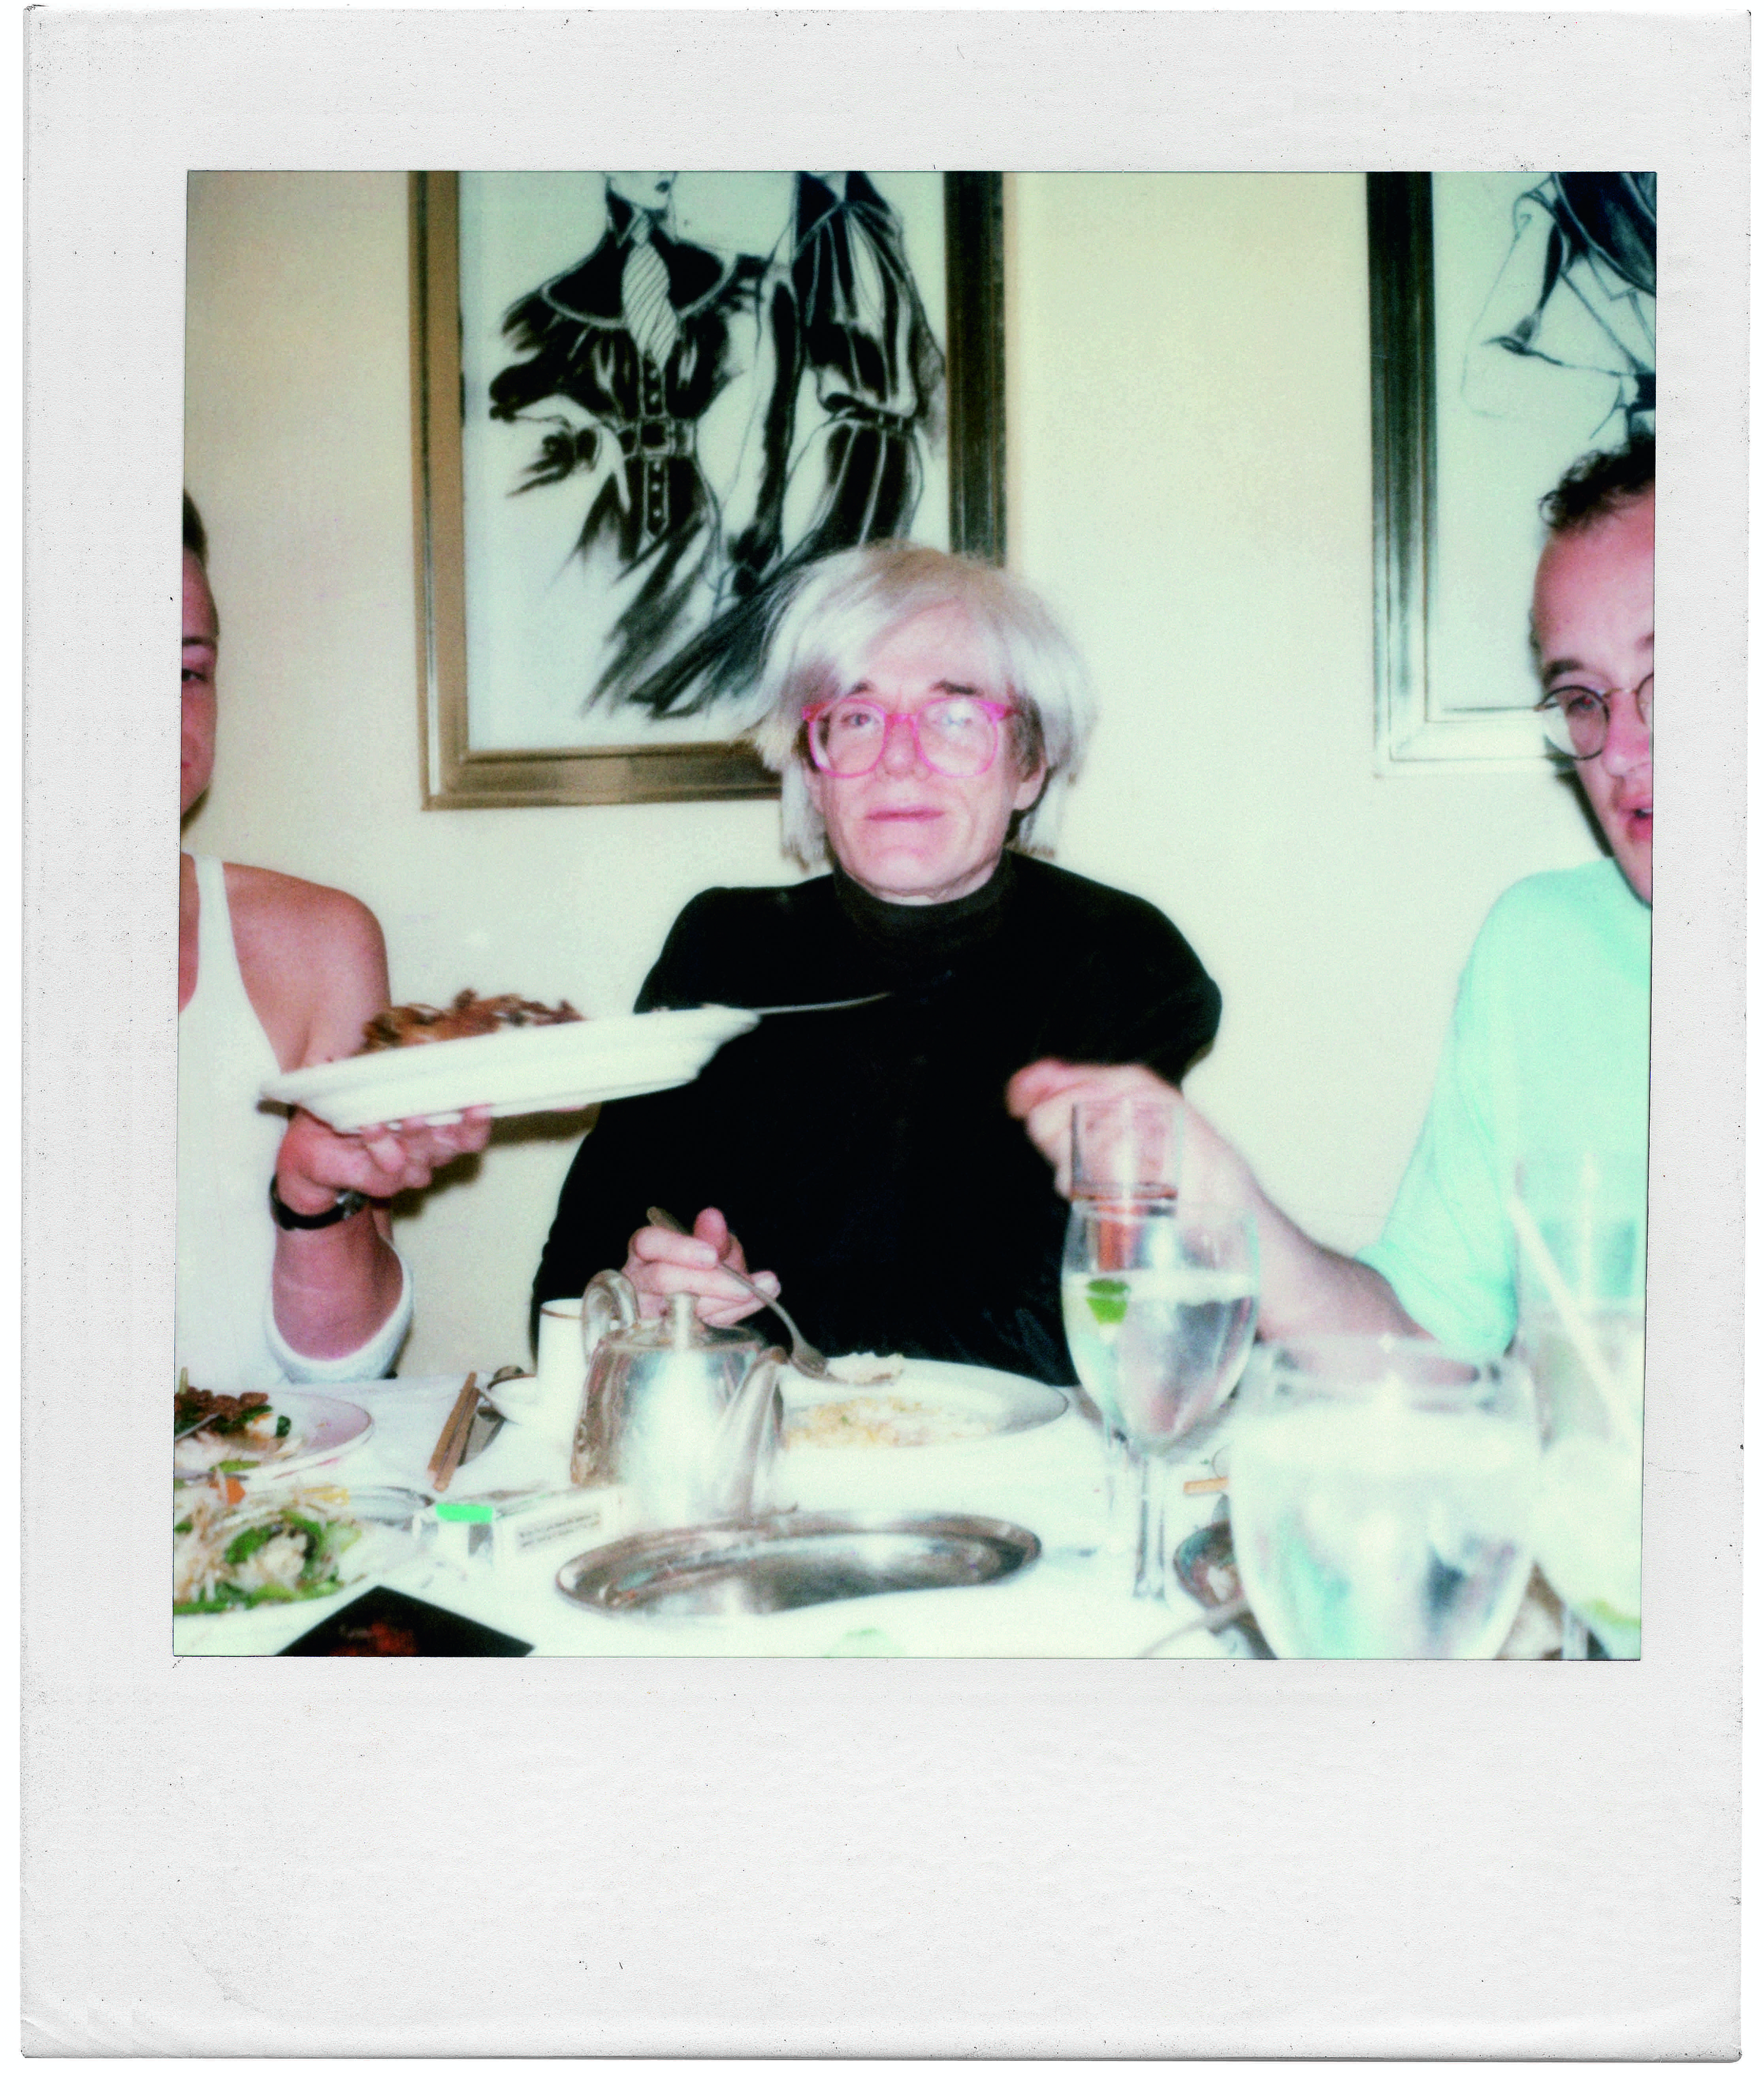  ANDY WARHOL, POLAROID PHOTOGRAPHED BY MARIPOL